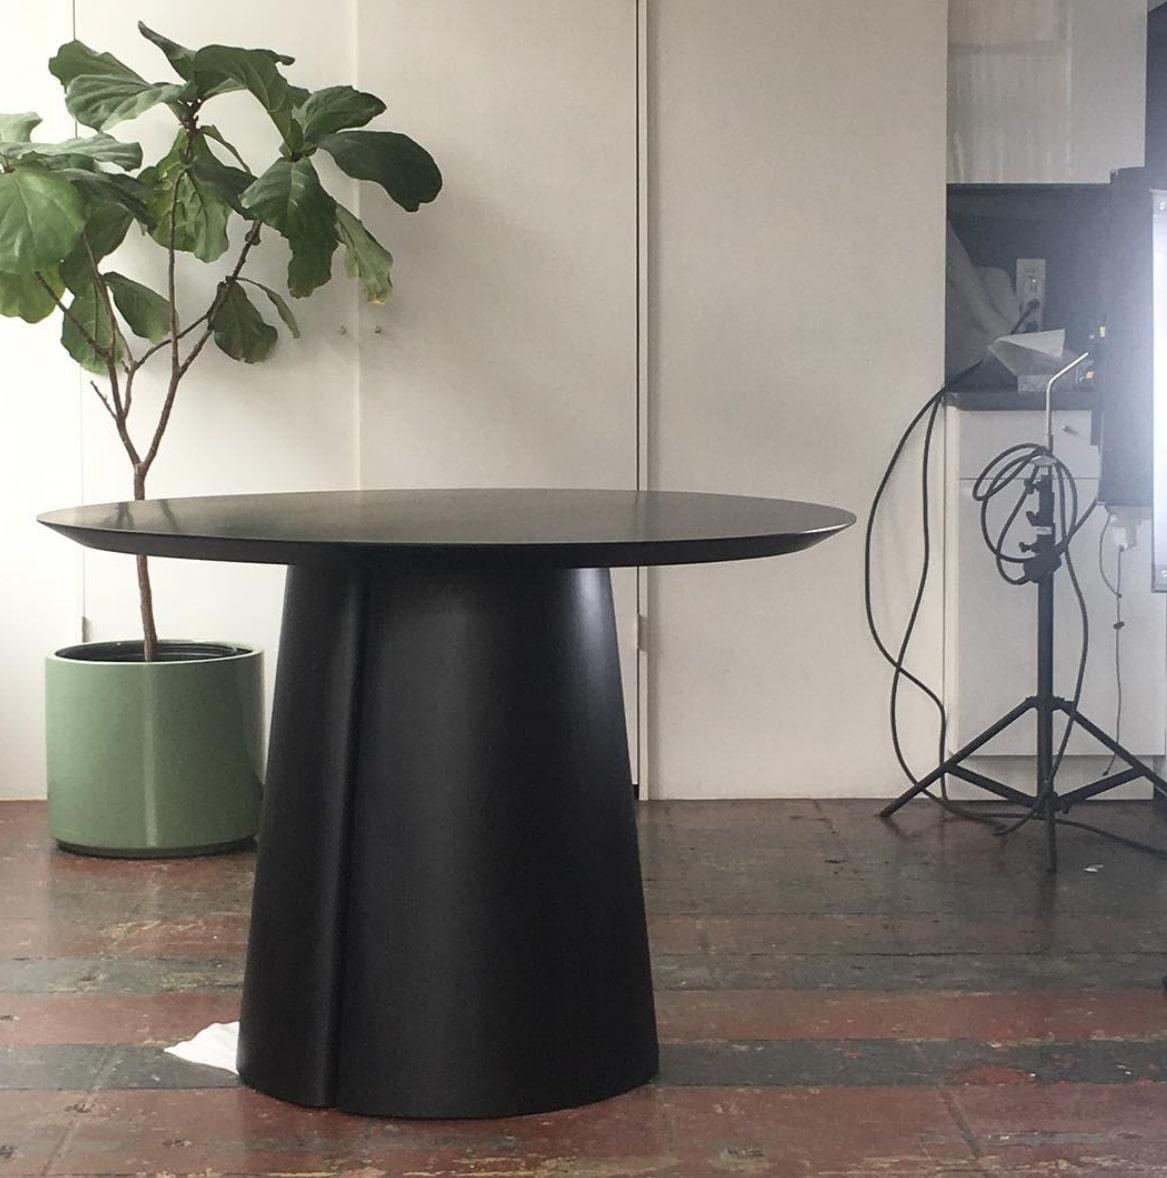 Contemporary Column Round Table by Black Table Studio, Rift, Represented by Tuleste Factory